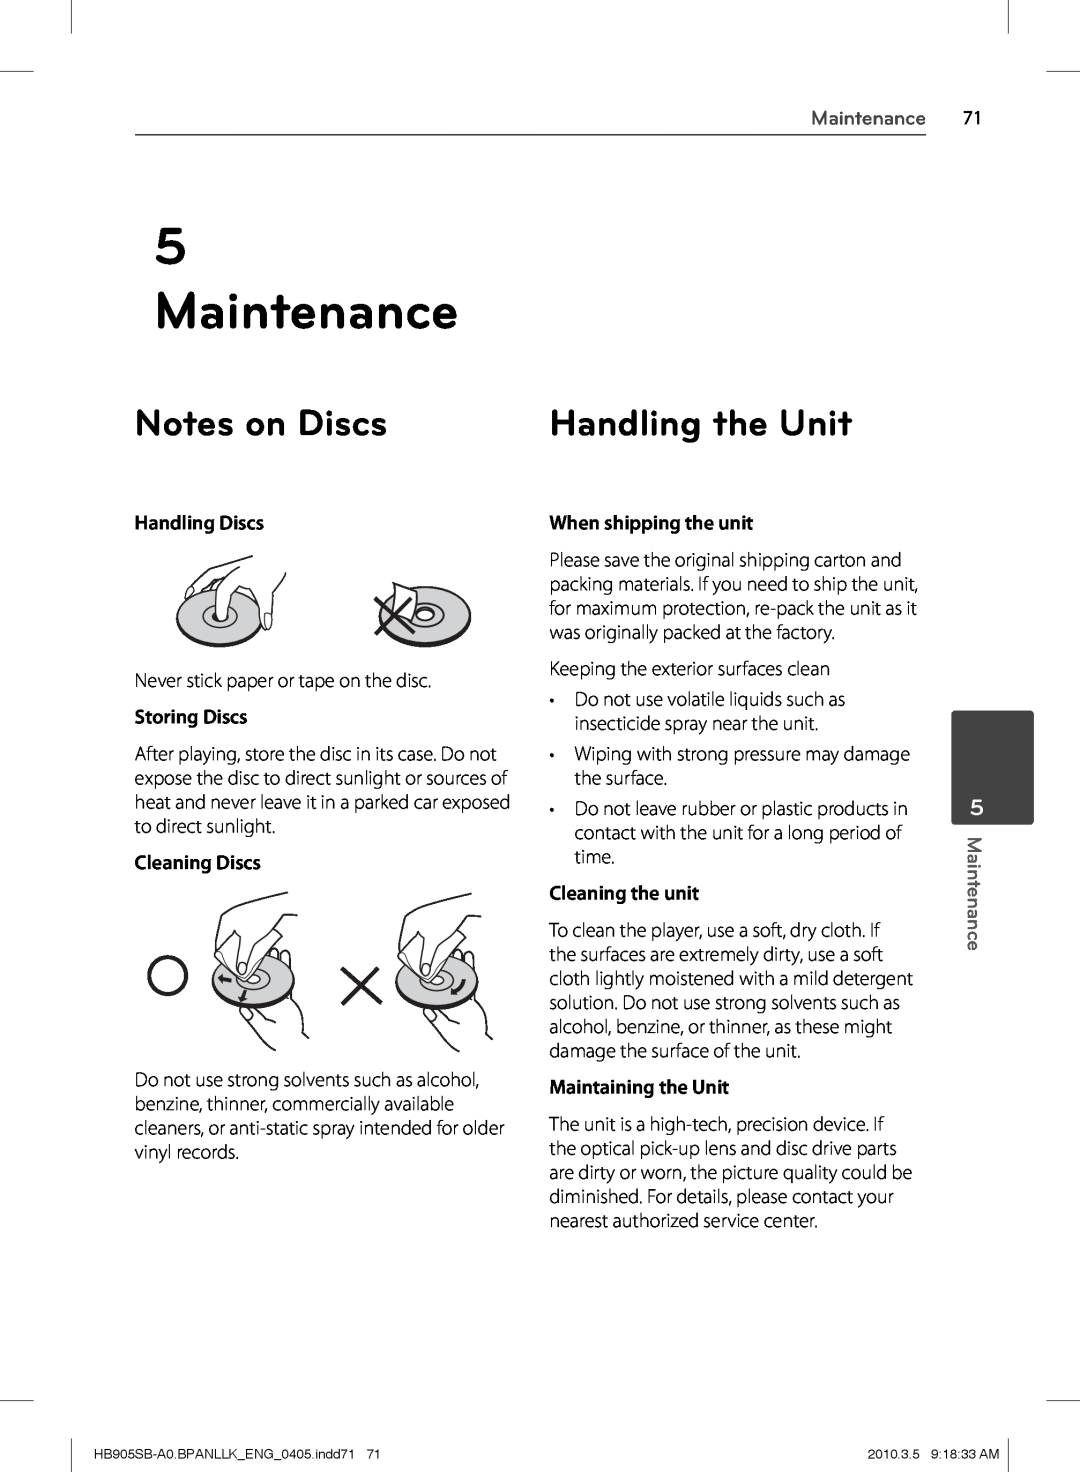 LG Electronics HB905SB owner manual Maintenance, Notes on Discs, Handling the Unit, Handling Discs, When shipping the unit 